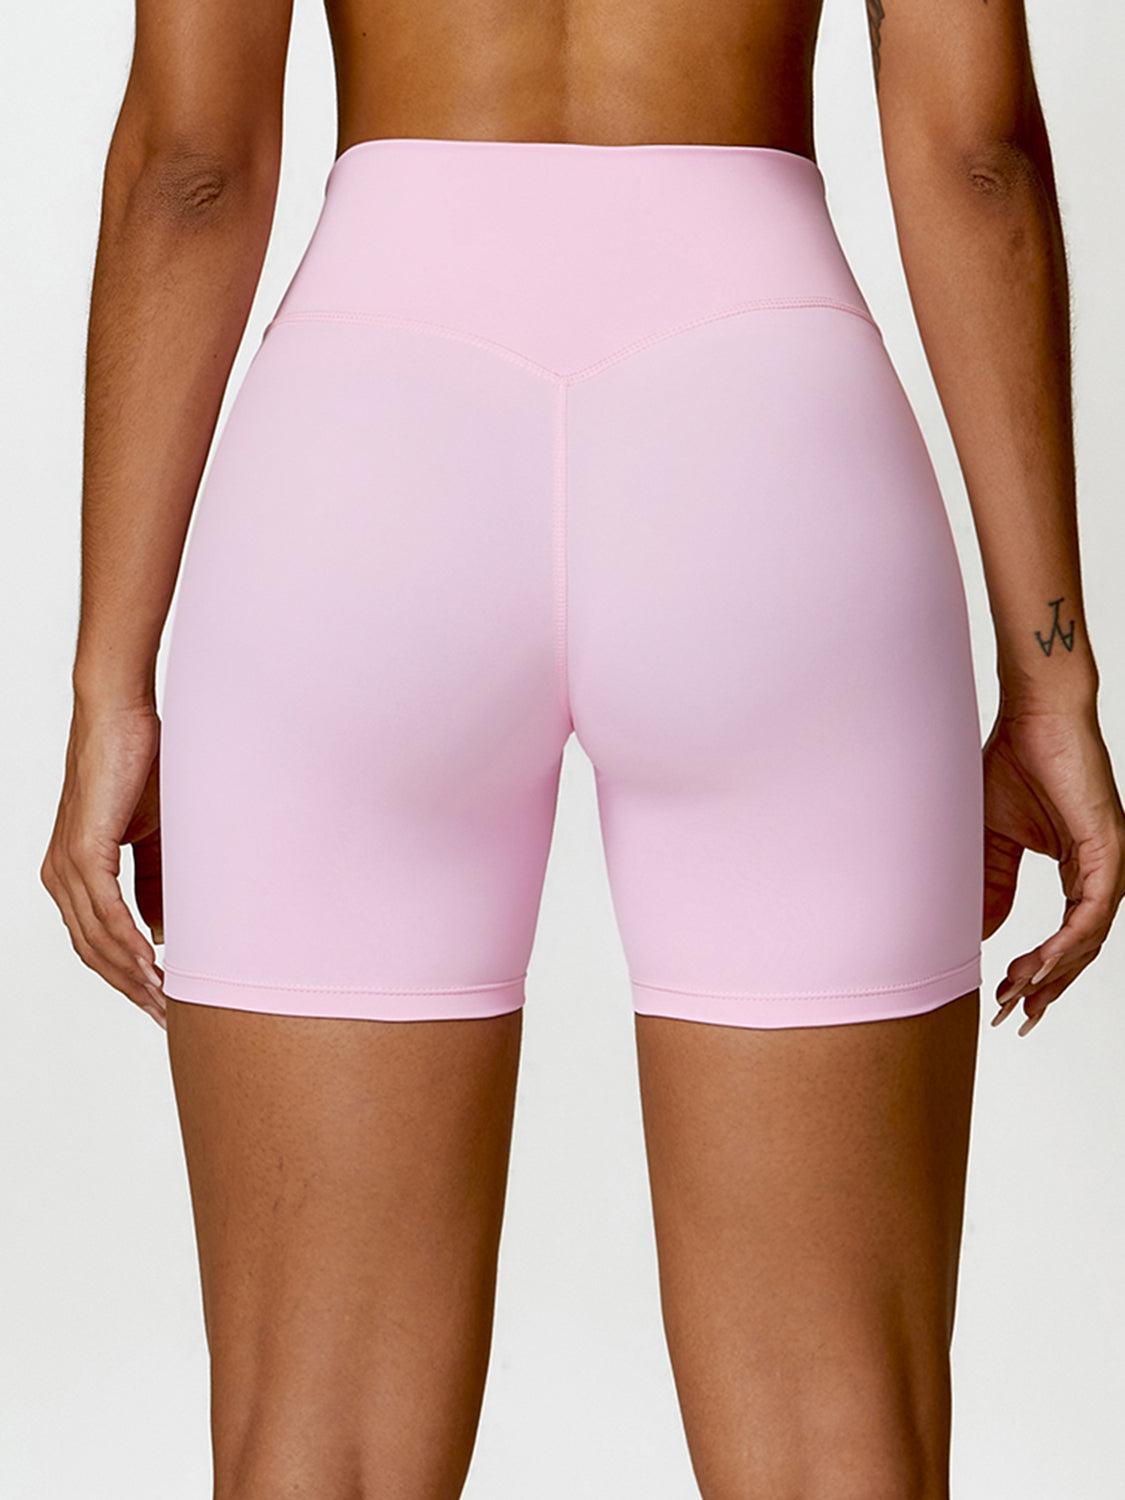 the back of a woman in pink shorts